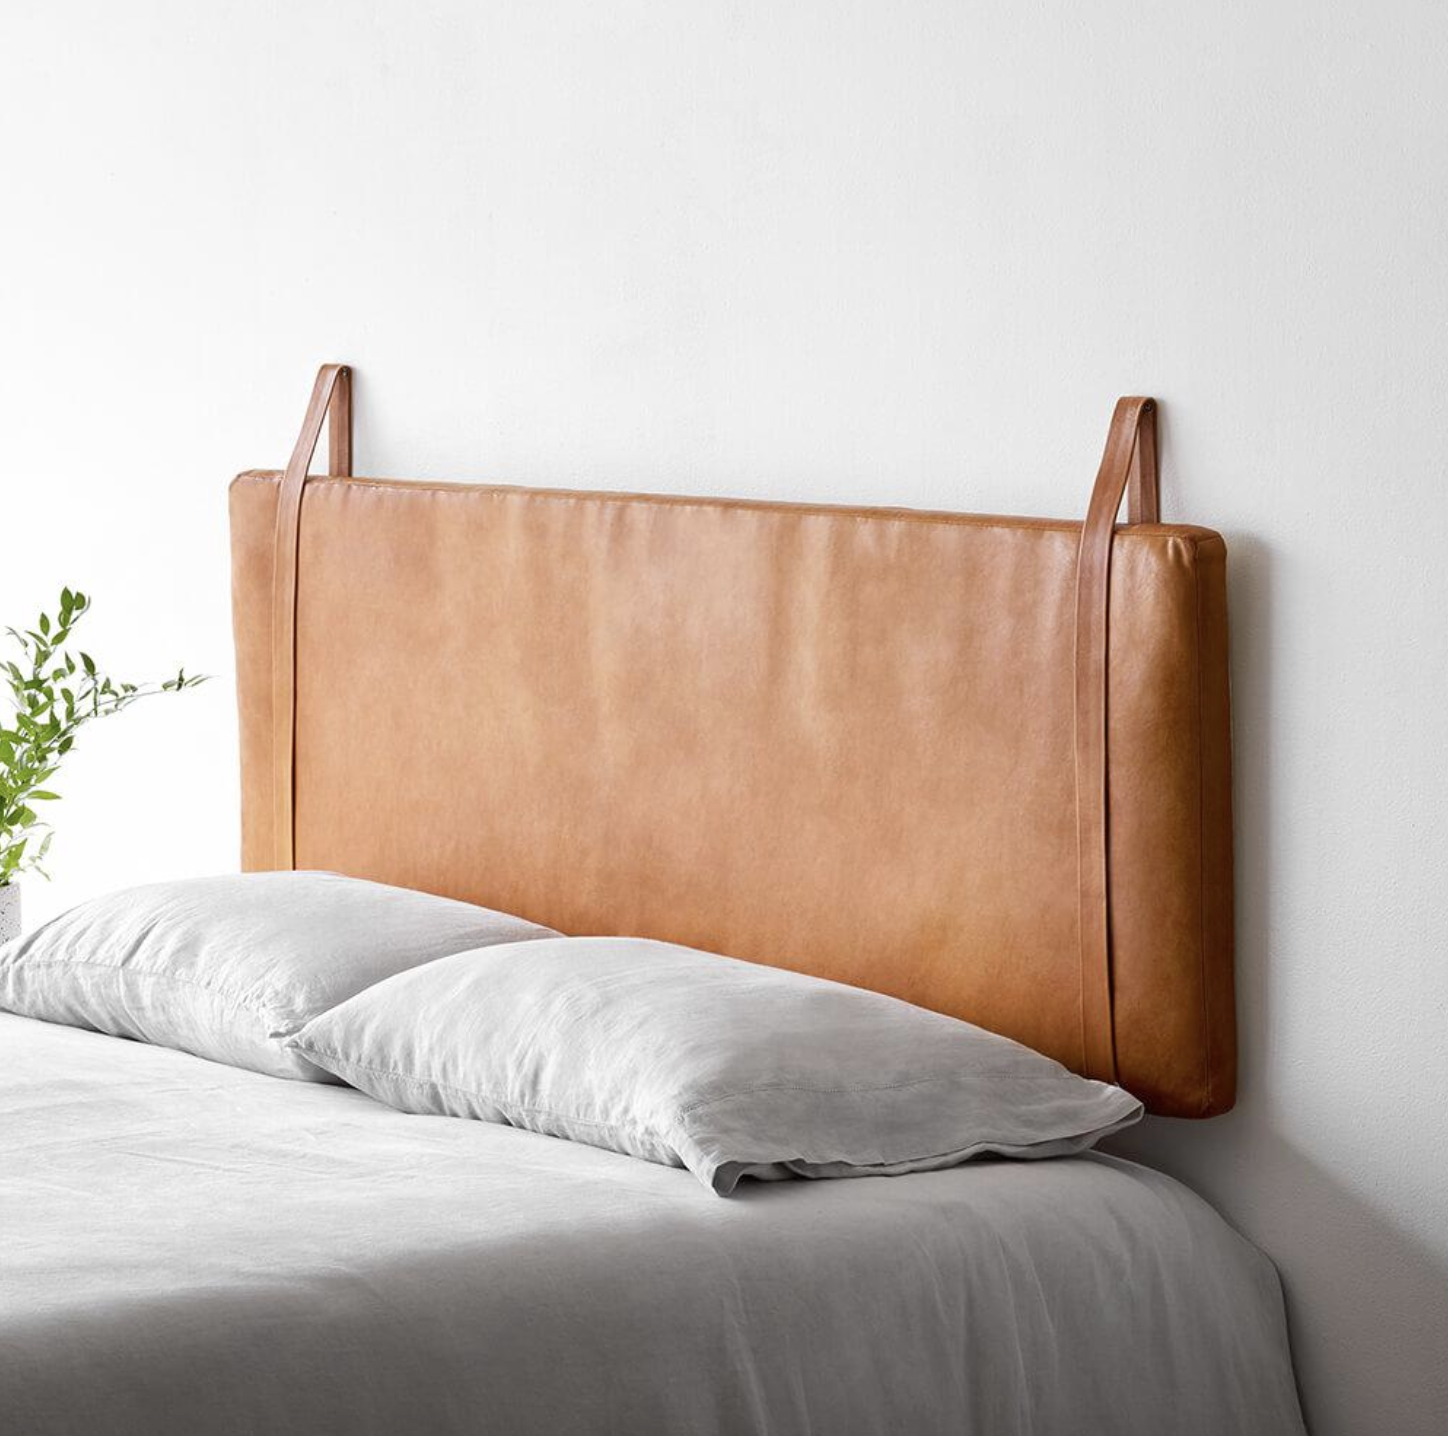 9 Wall Mounted Floating Headboards We, How To Fix A Large Headboard The Wall